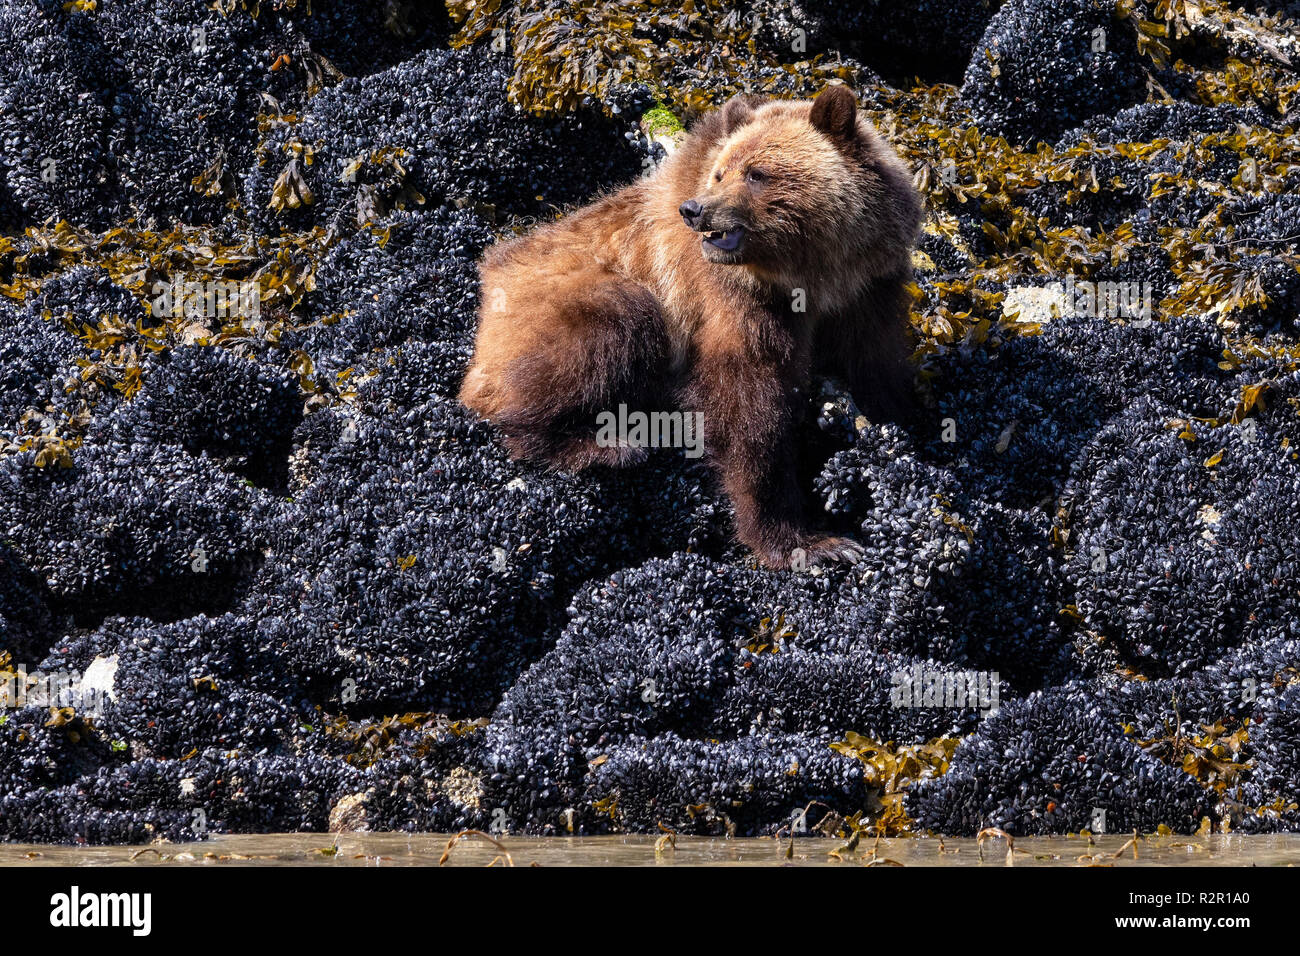 Grizzly bear along the Knight Inlet shoreline at low tide, First Nations Territory, British Columbia, Canada Stock Photo